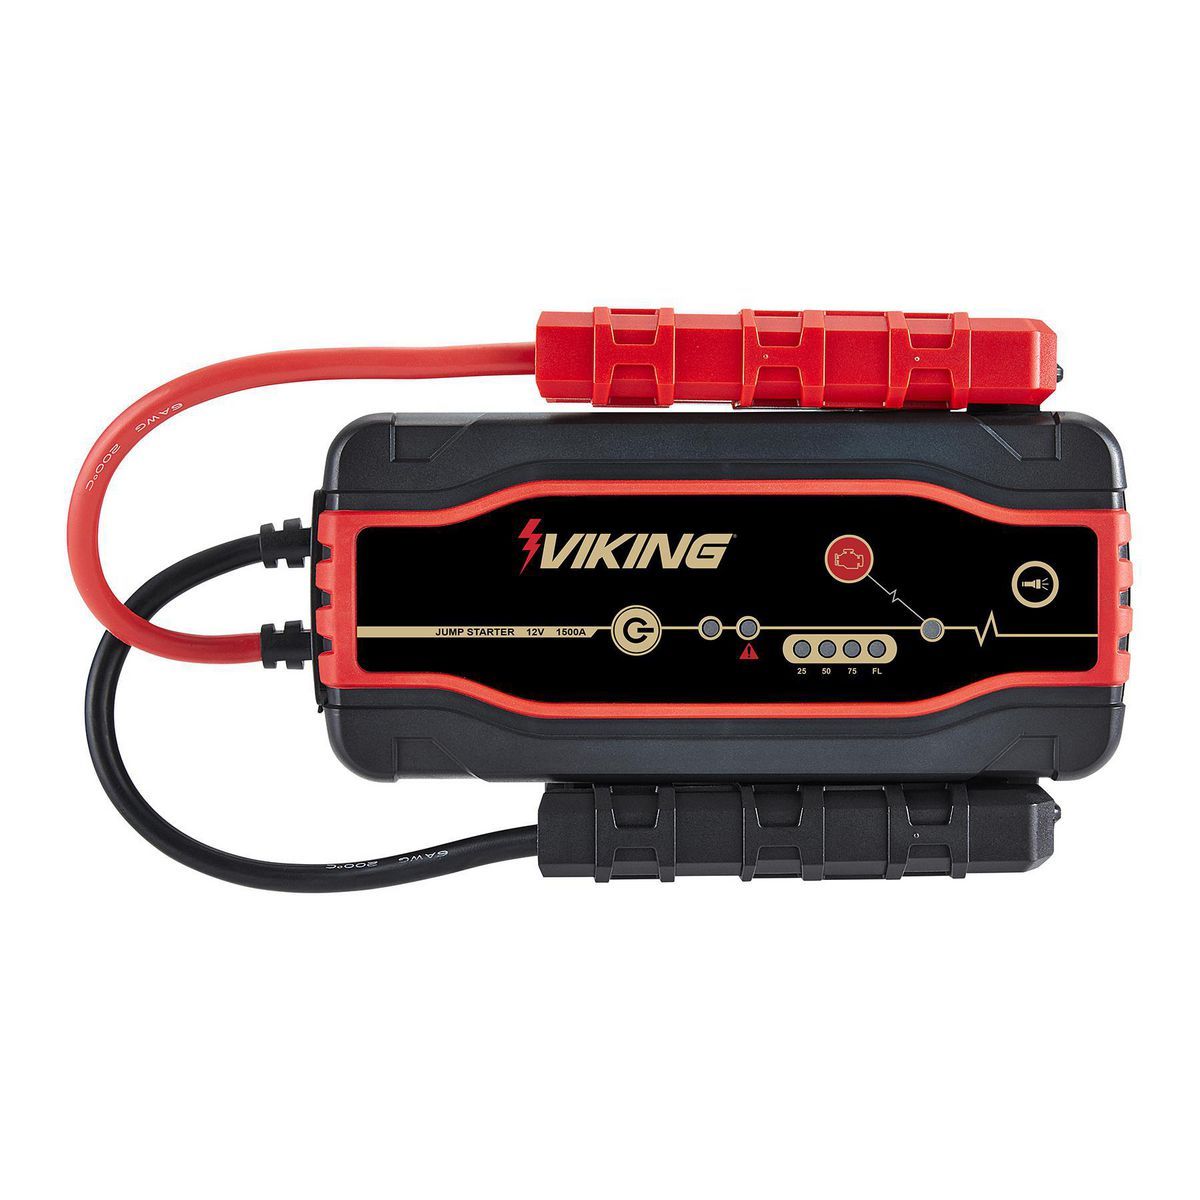 1500 Peak Amp Portable Lithium Ion Jump Starter and Power Pack